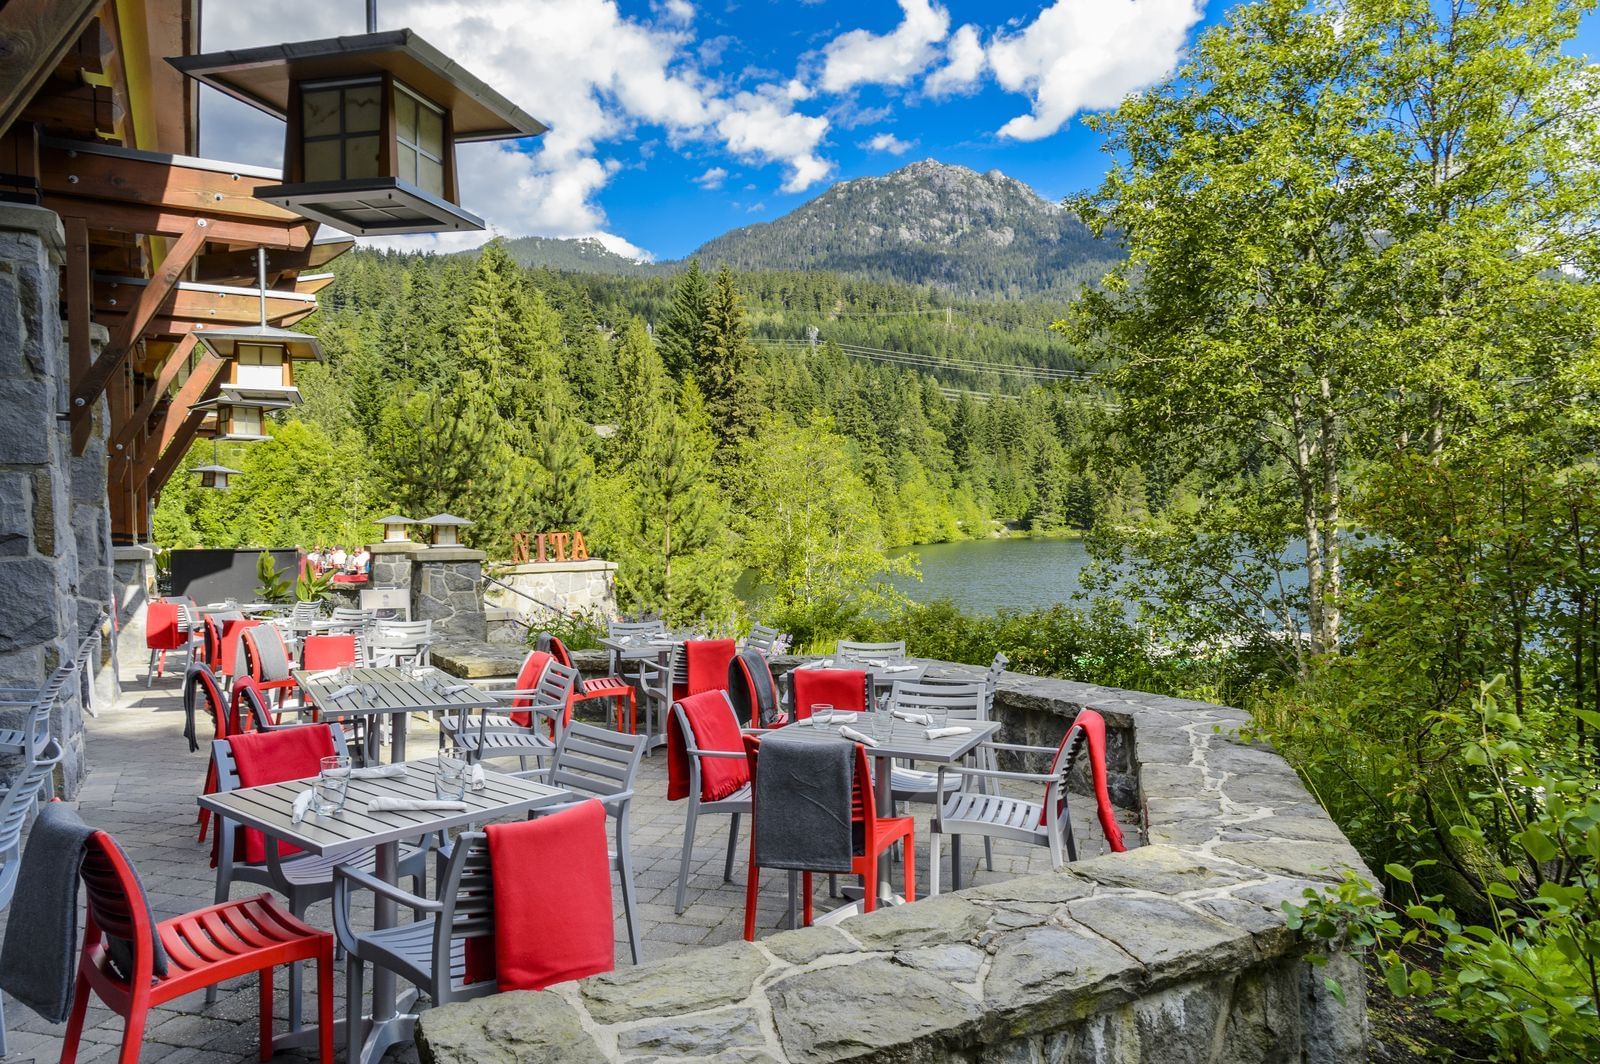 Dining & lounging area with a mountain view, Nita Lake Lodge